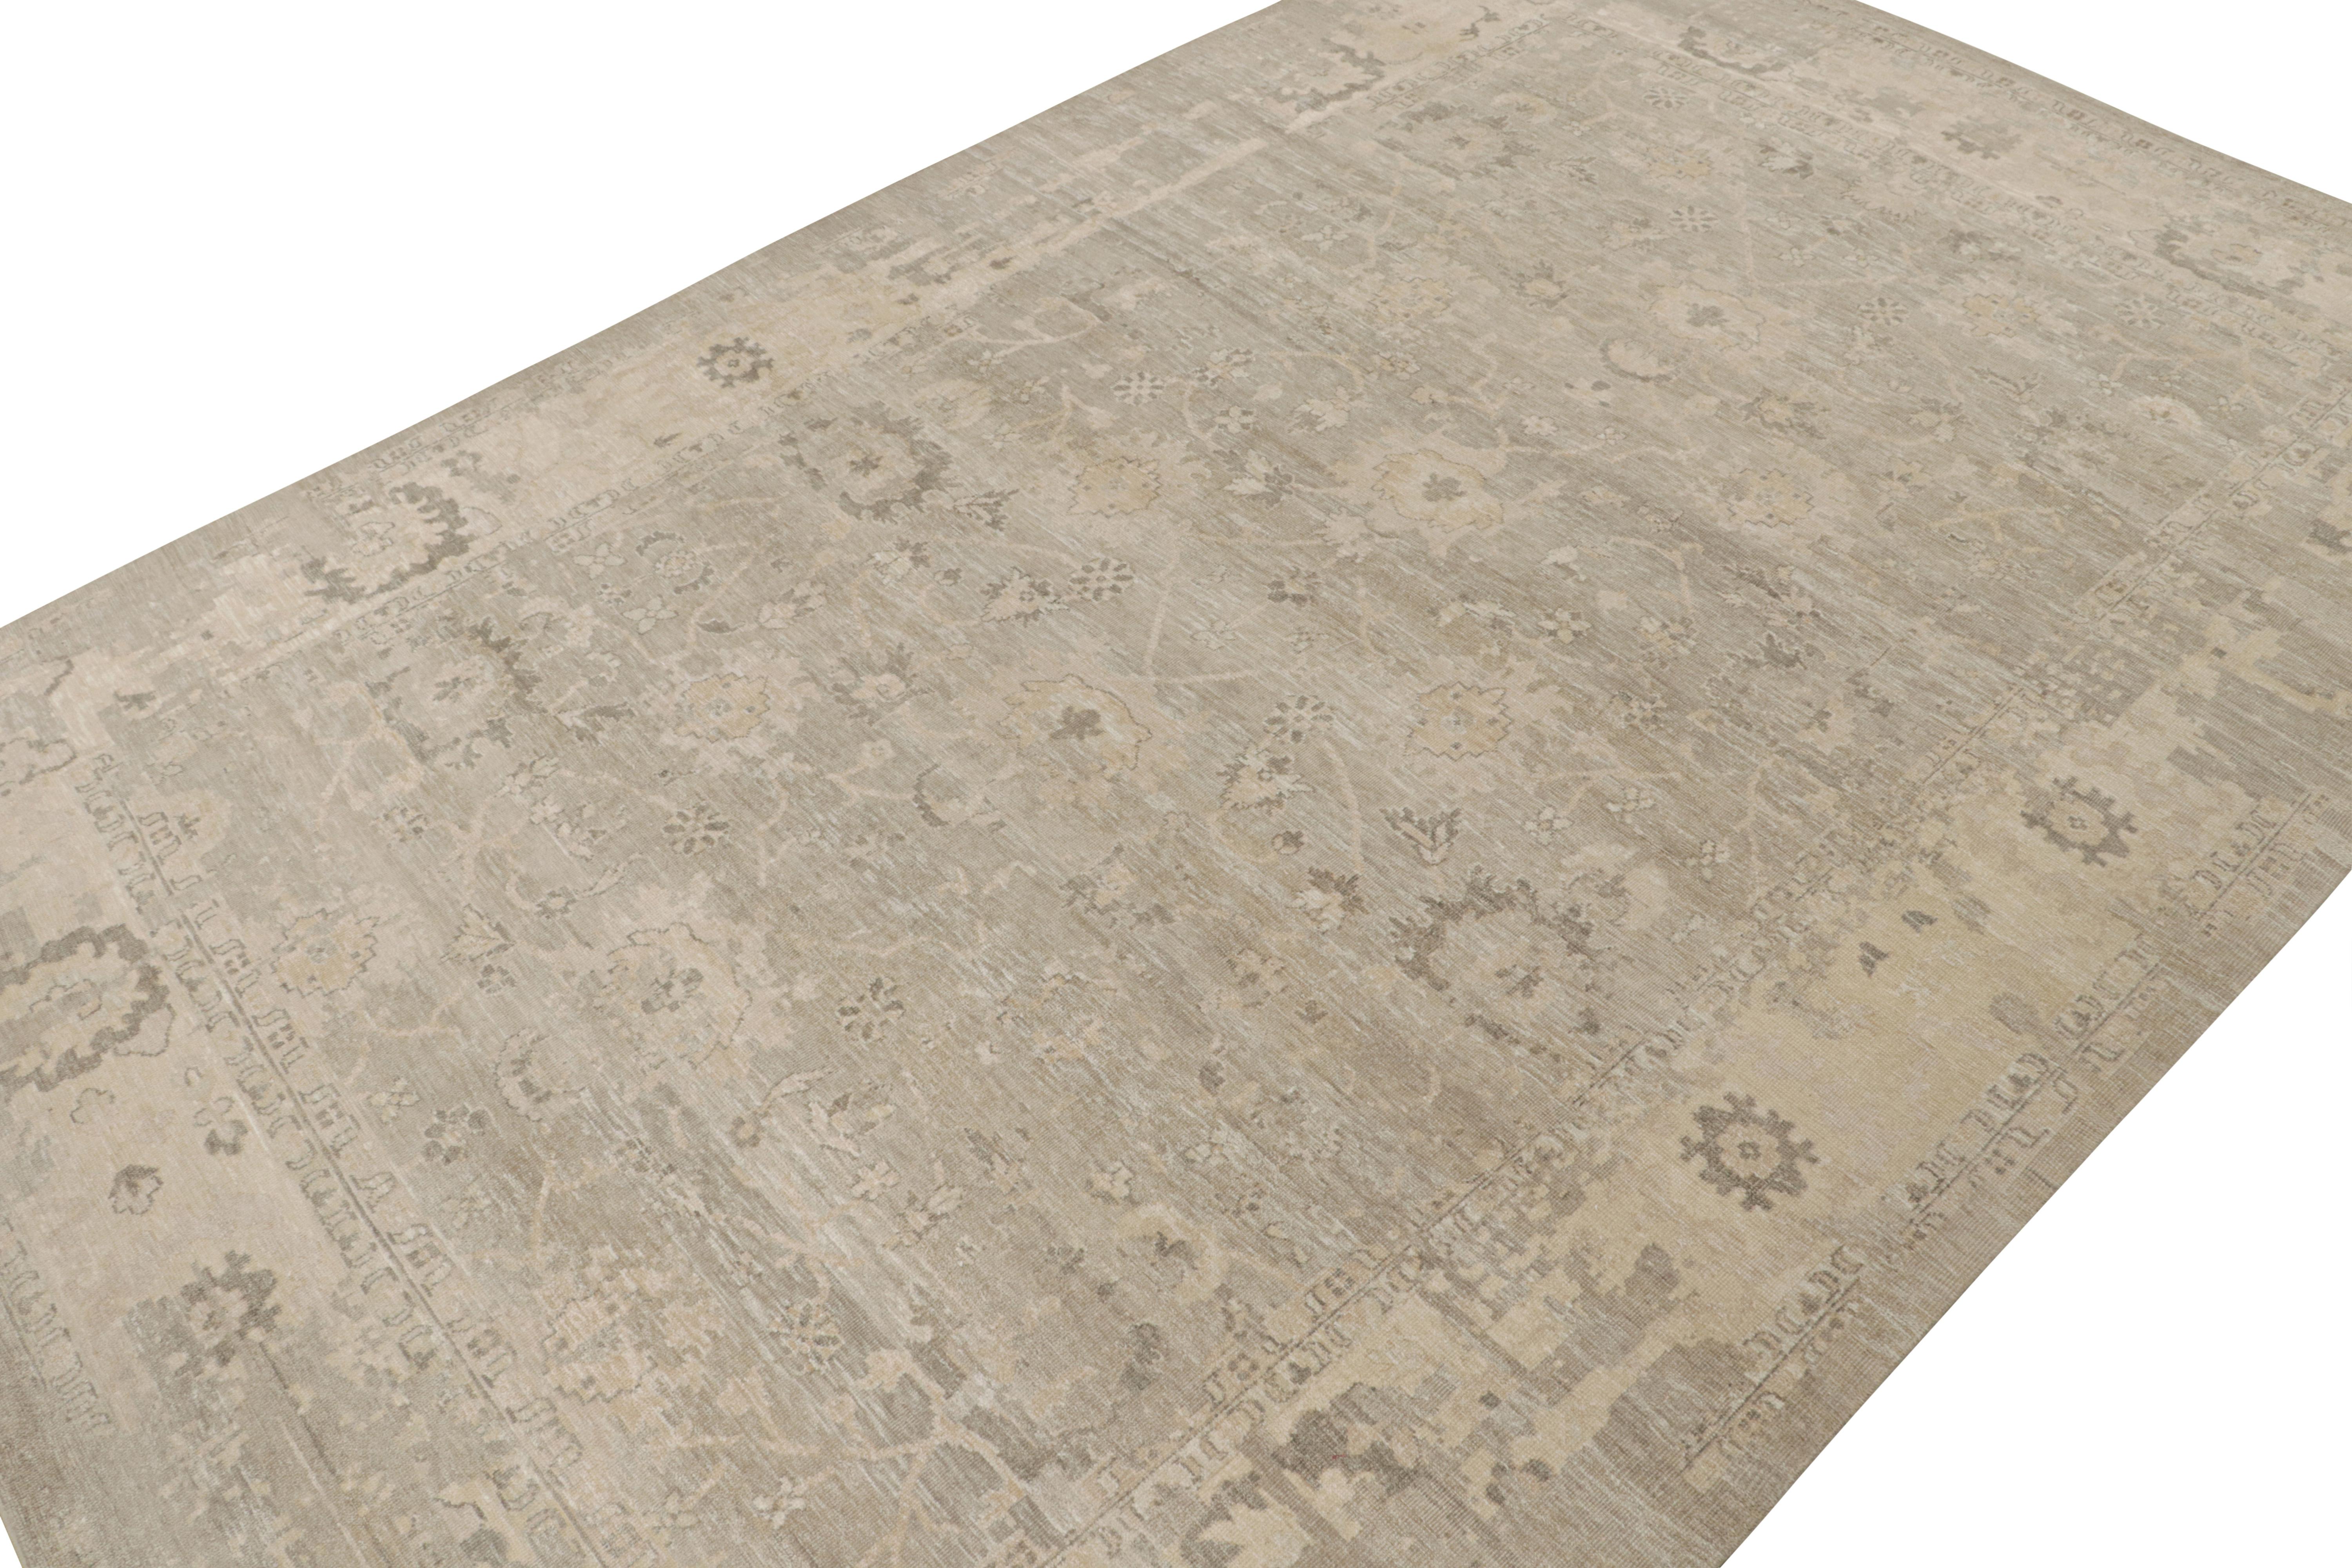 This 12x18 oversized rug from the Modern Classics Collection by Rug & Kilim is from a new line inspired by antique Oushak rugs. Hand-knotted in silk, its design enjoys beige and silver-gray floral patterns with ivory accents and neutral tones. 

On